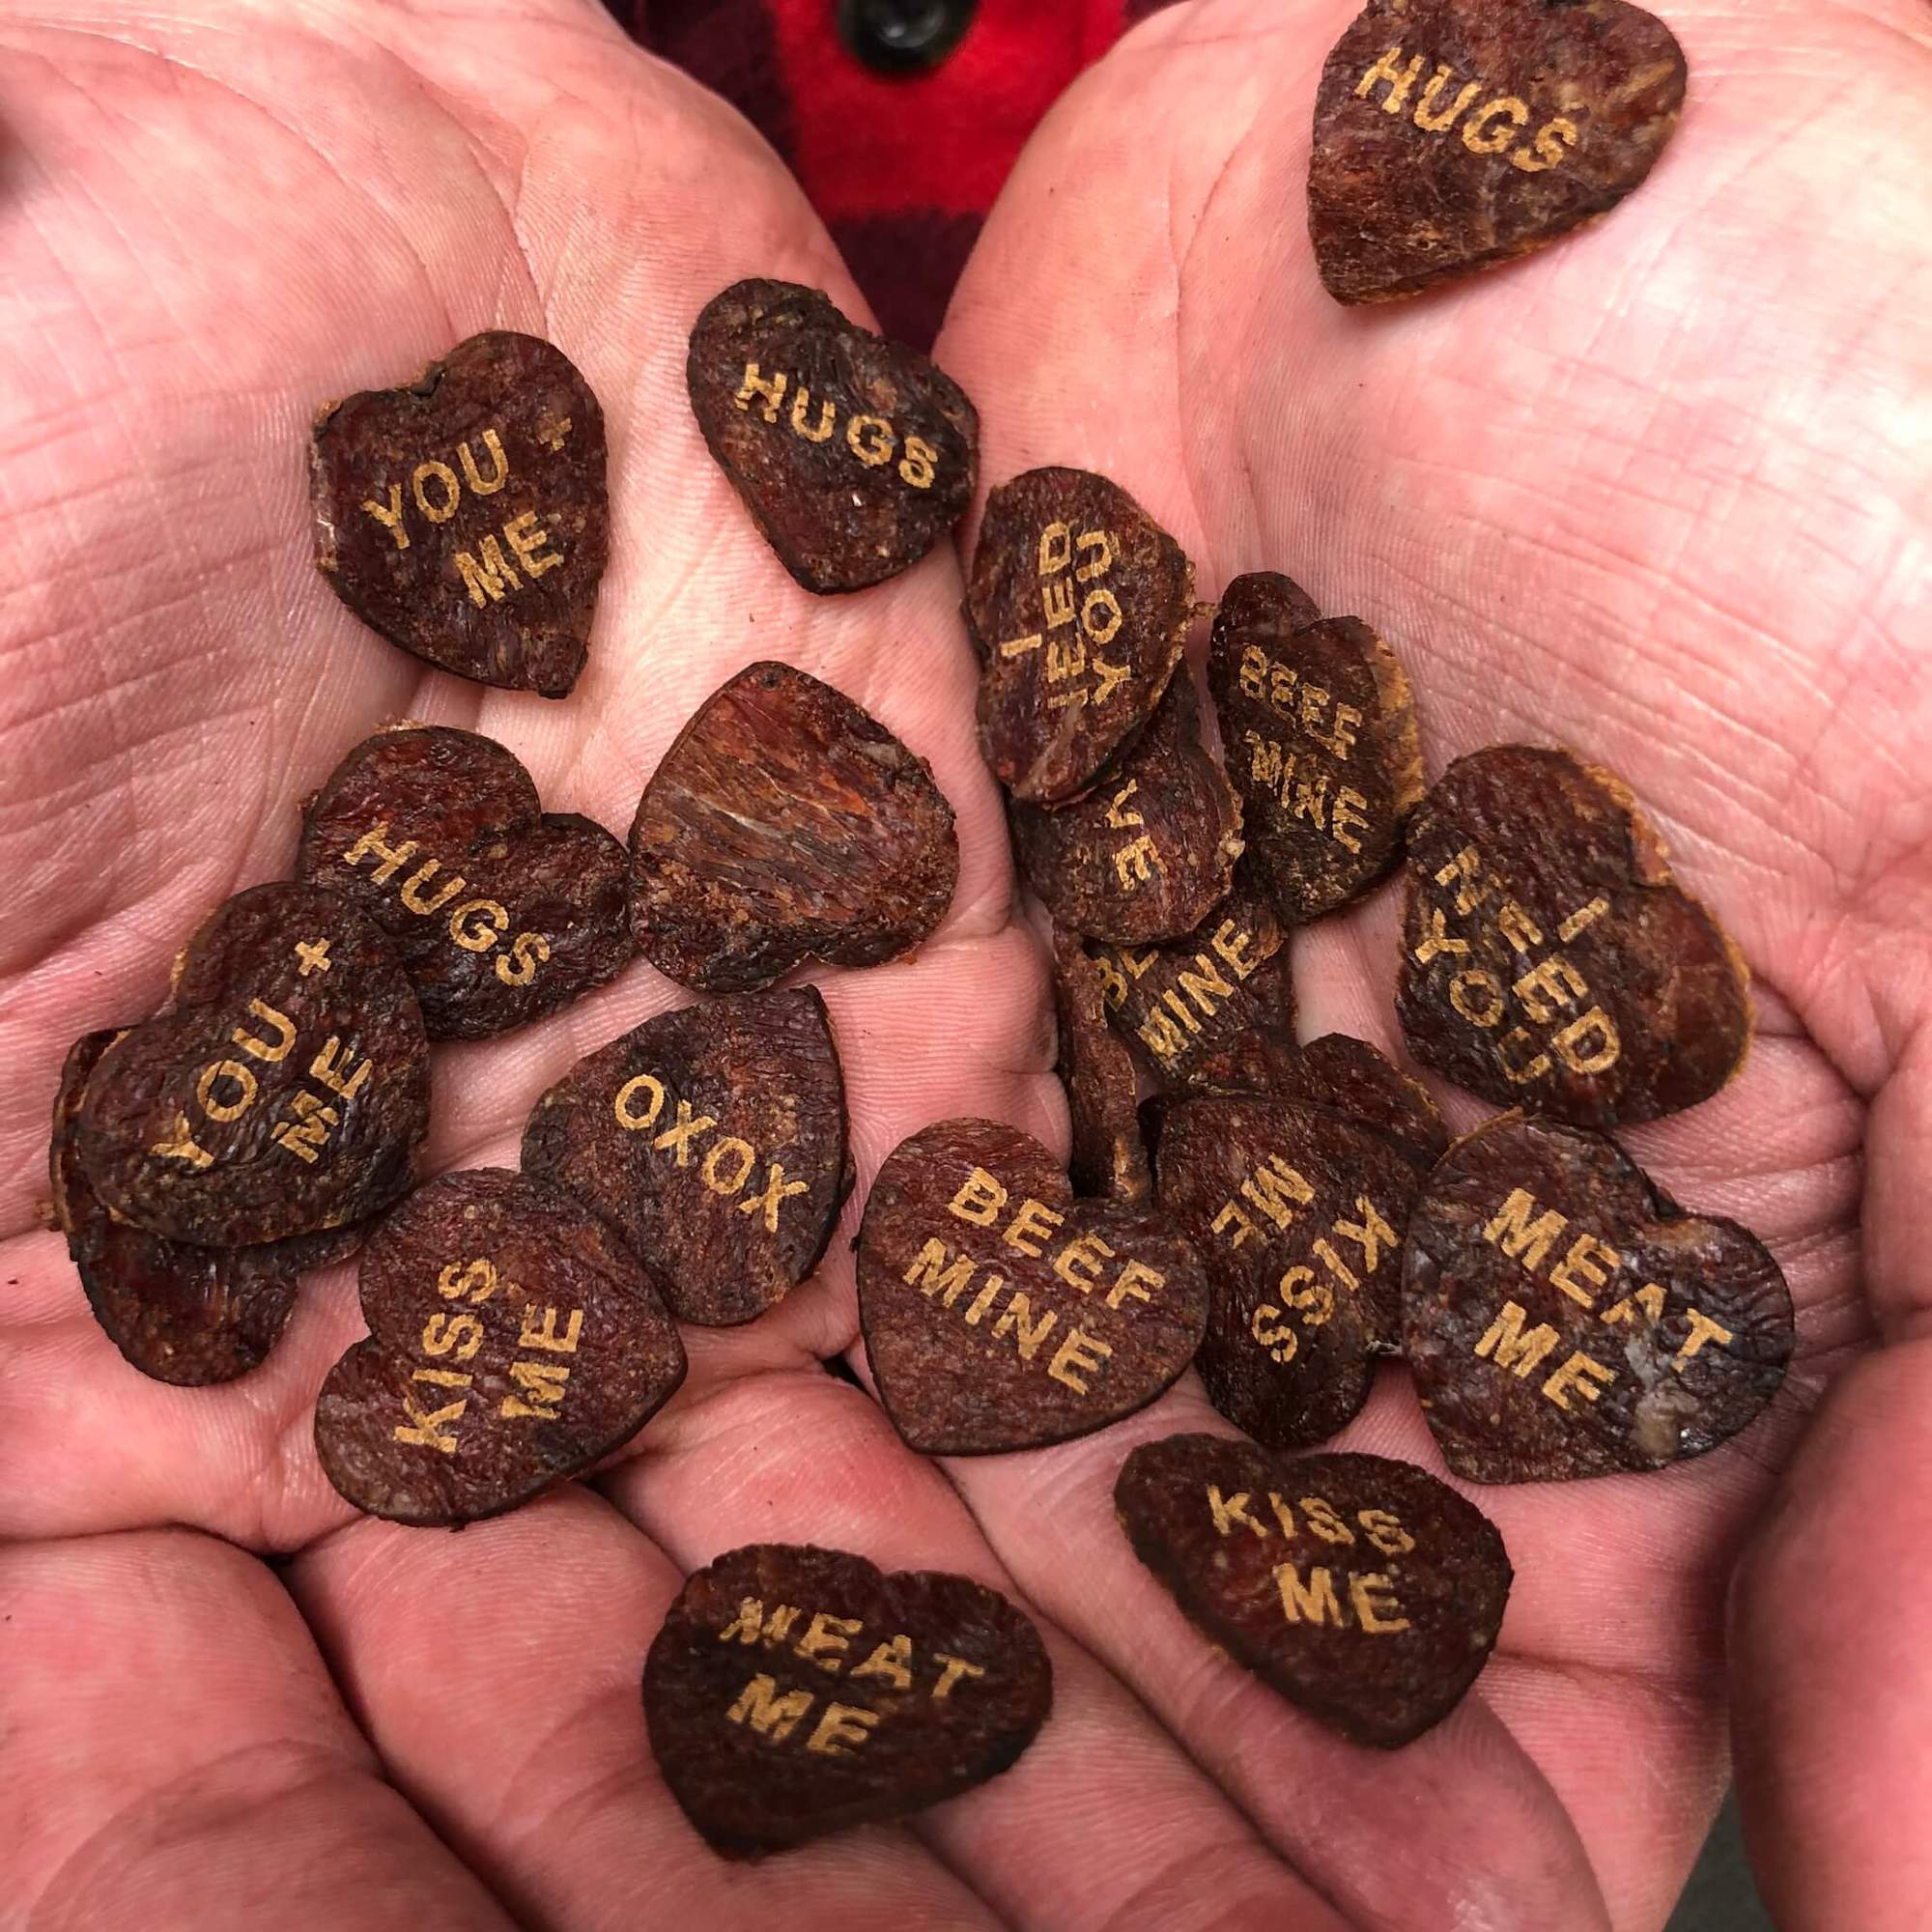 19 Meathearts™, each engraved with Valentine's Day messages, held in two handss